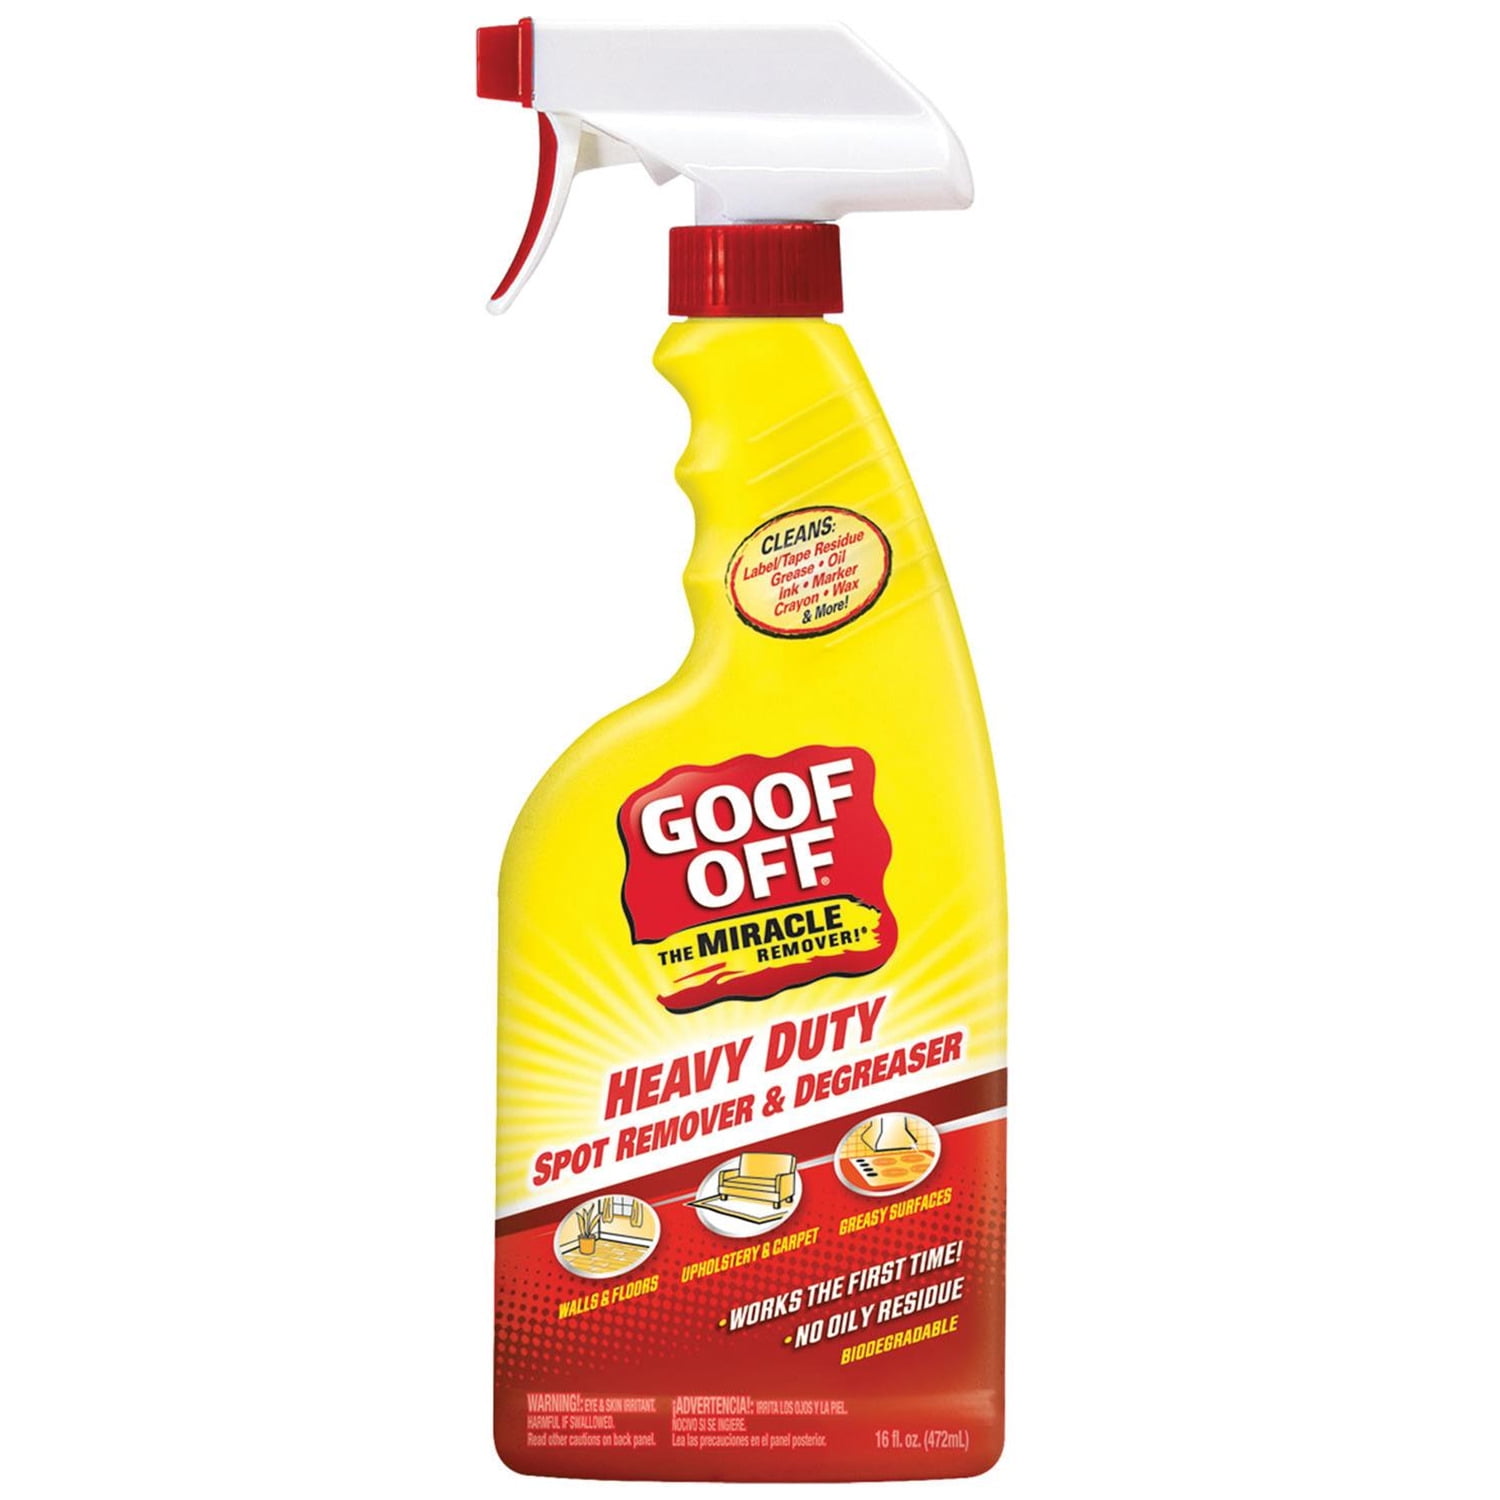 Goof Off 1 gal. Heavy Duty Multi-Surface Spot Remover & Degreaser FG722 -  The Home Depot